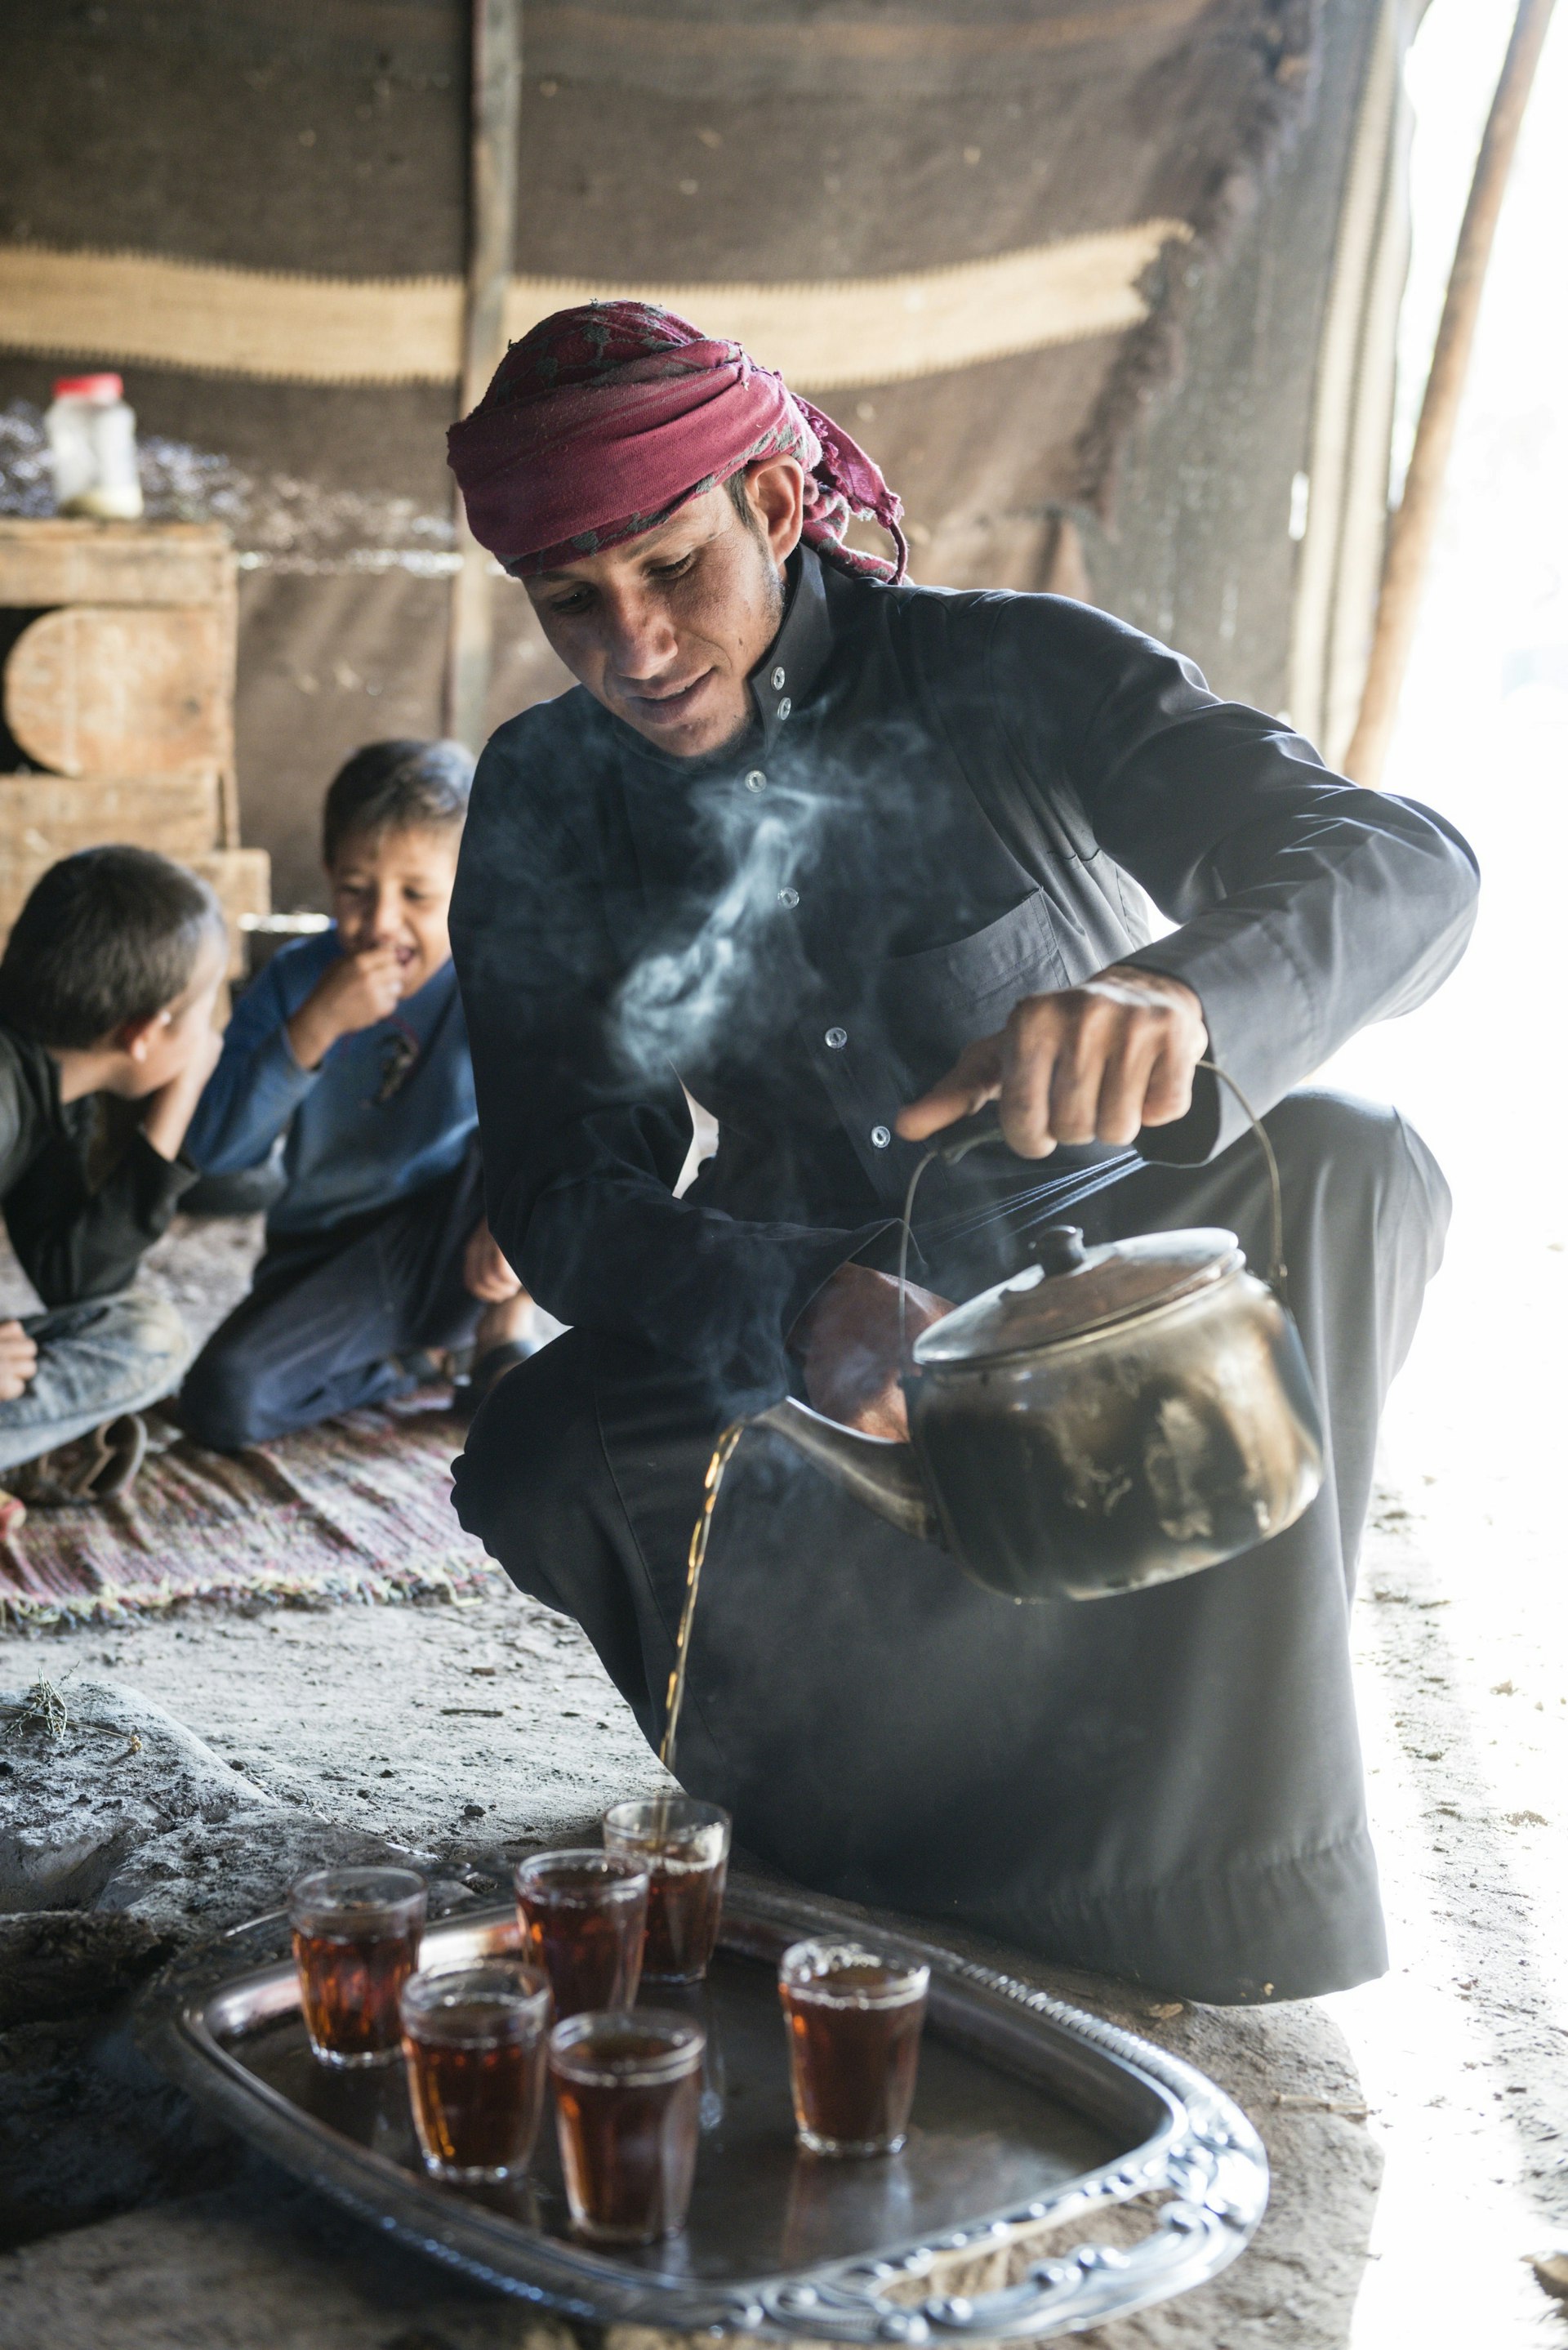 A member of the Beni Atieh tribe pours out tea for guests in a desert tent.